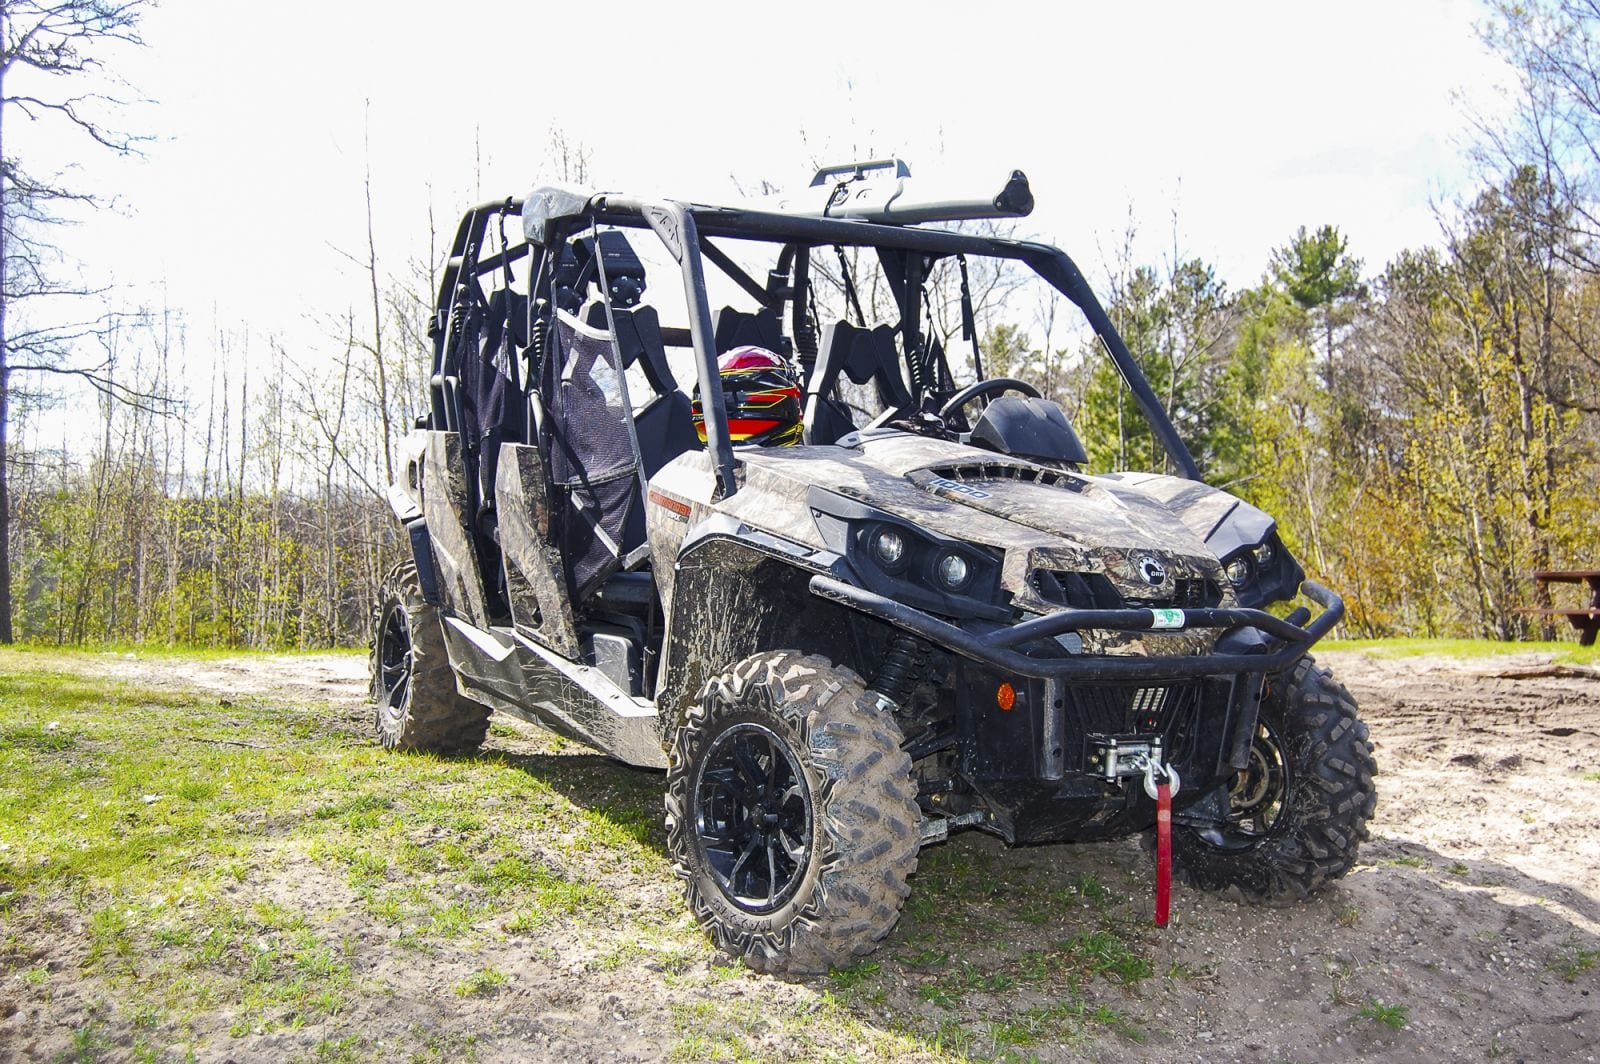 Another nice feature that makes the Commander XT package so appealing is the inclusion of the 4,500 lbs. Warn winch.